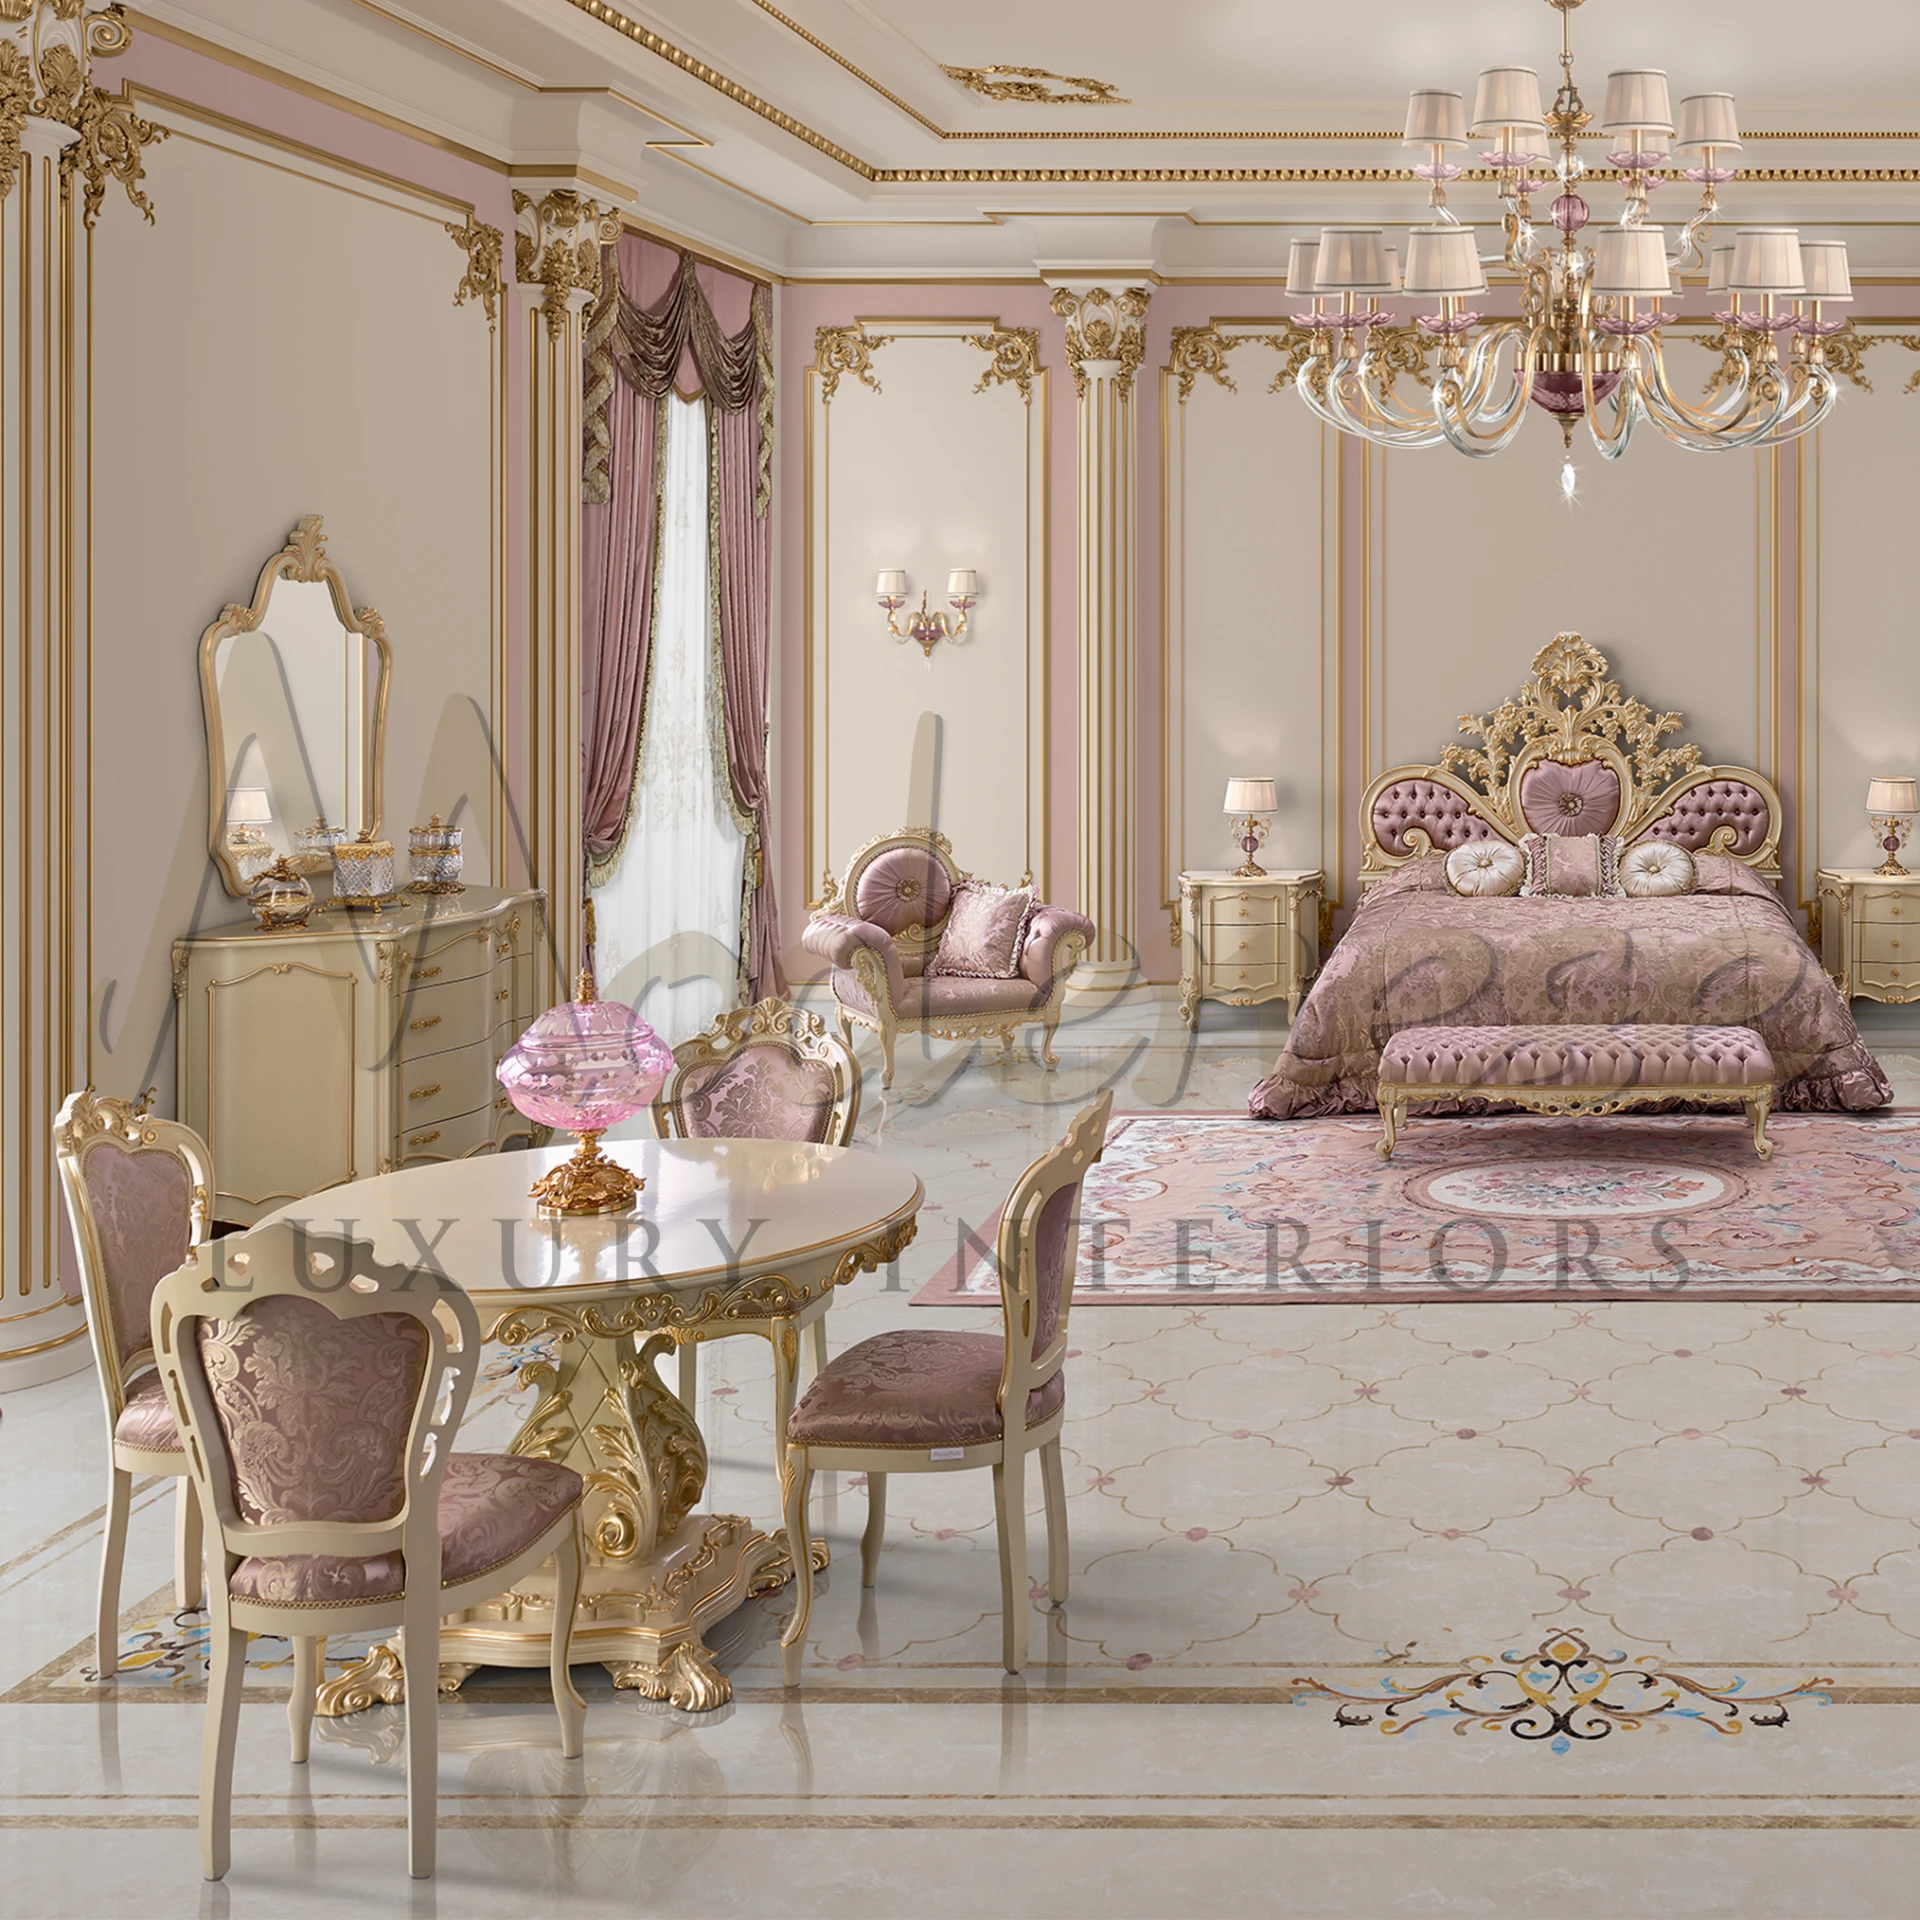 Luxurious bedroom with light pink and golden fabric accents and fancy decor.